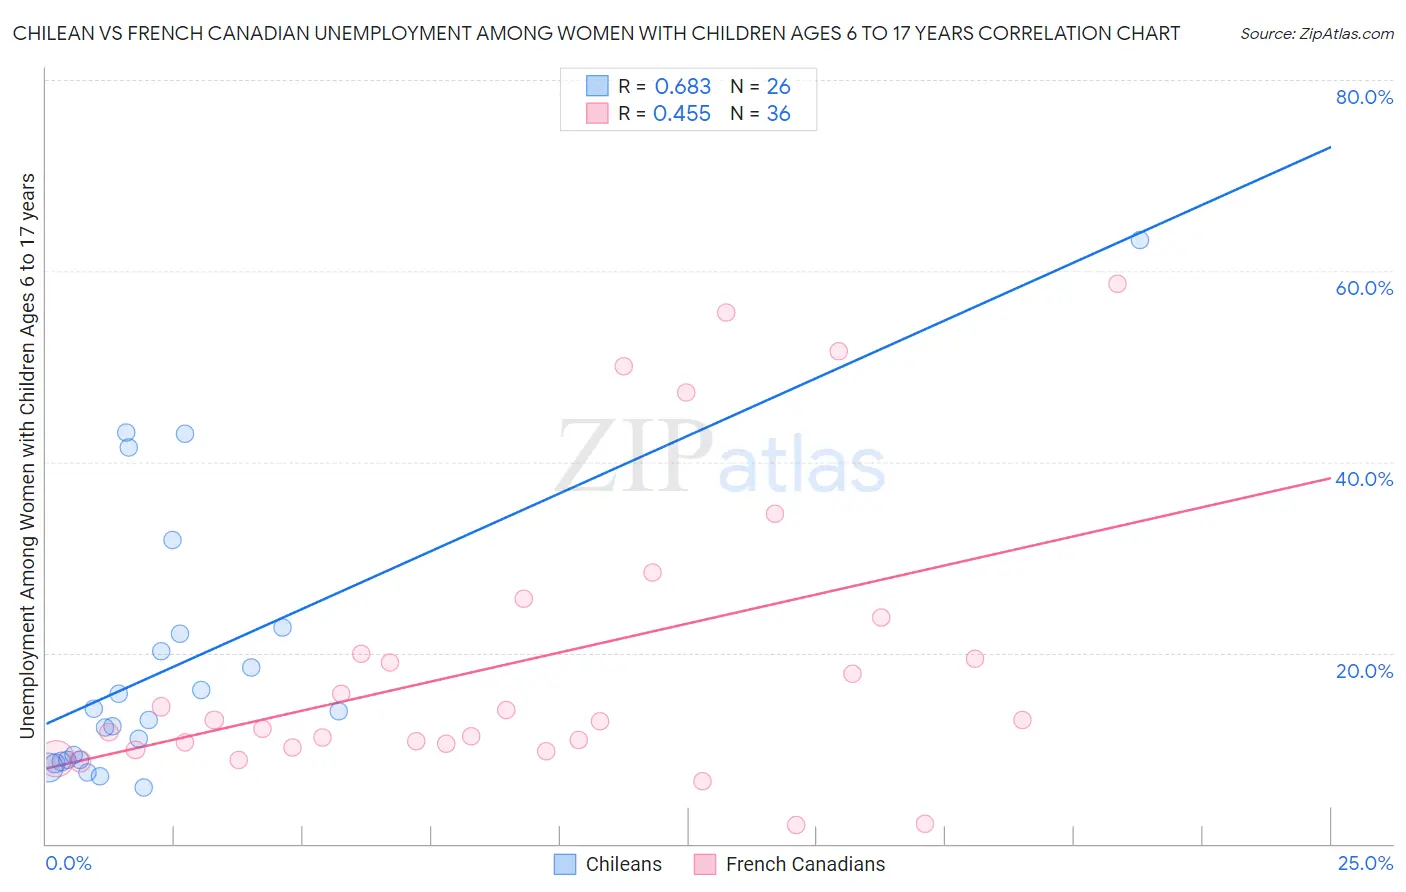 Chilean vs French Canadian Unemployment Among Women with Children Ages 6 to 17 years